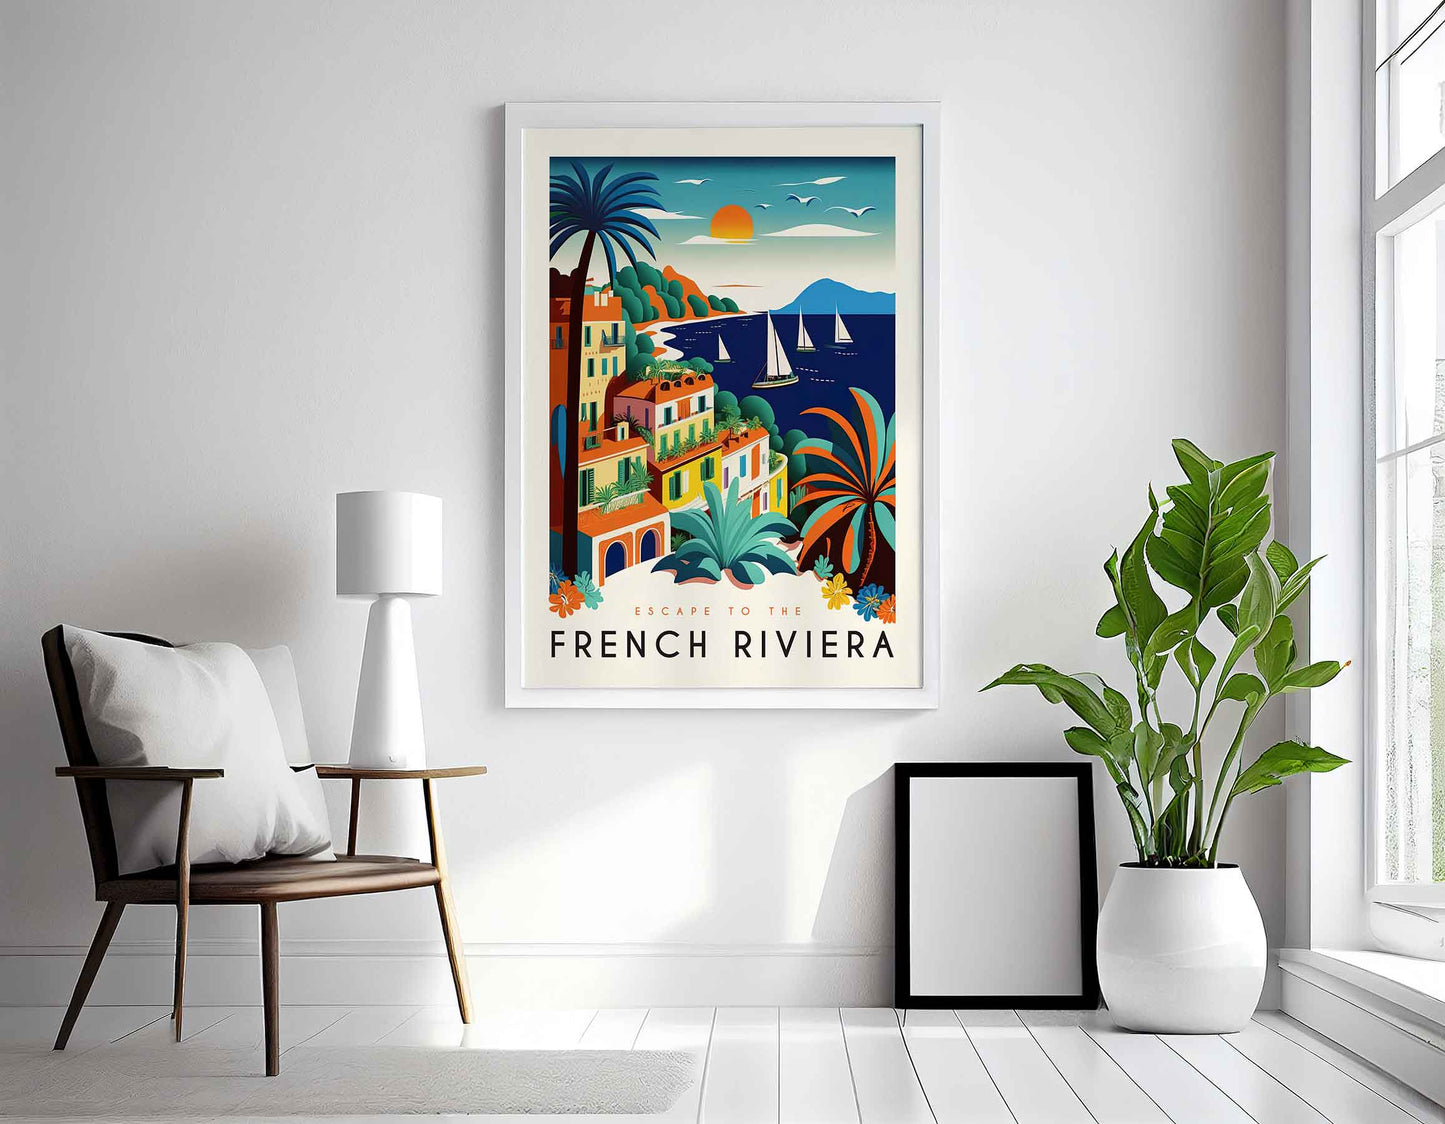 Framed Image of Colourful French Riviera Travel Illustration Wall Art Poster Print